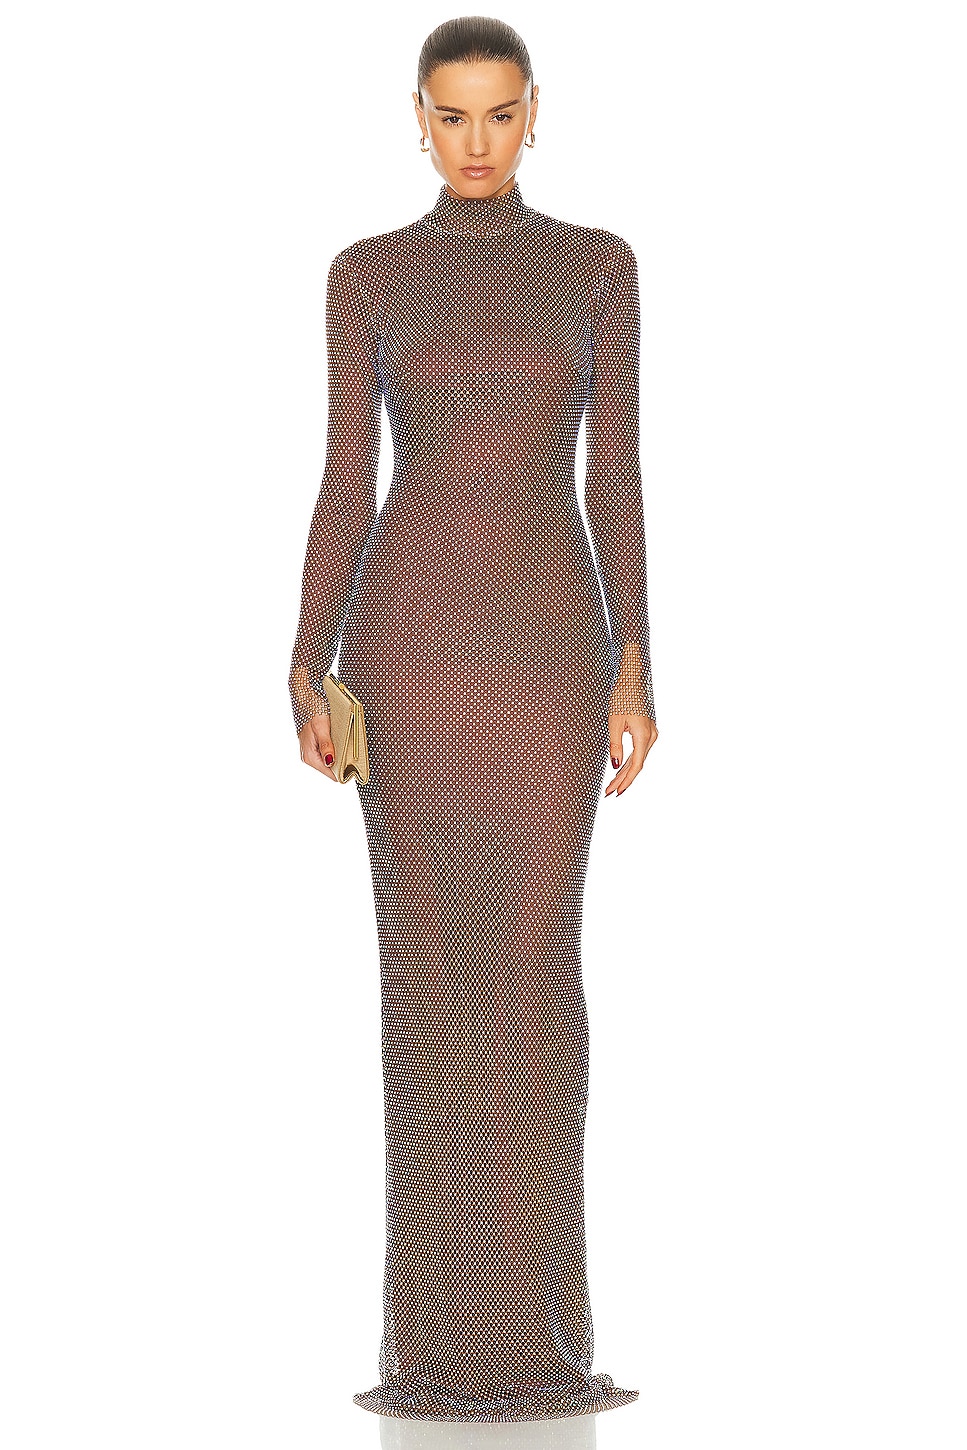 Donyale Dress in Brown